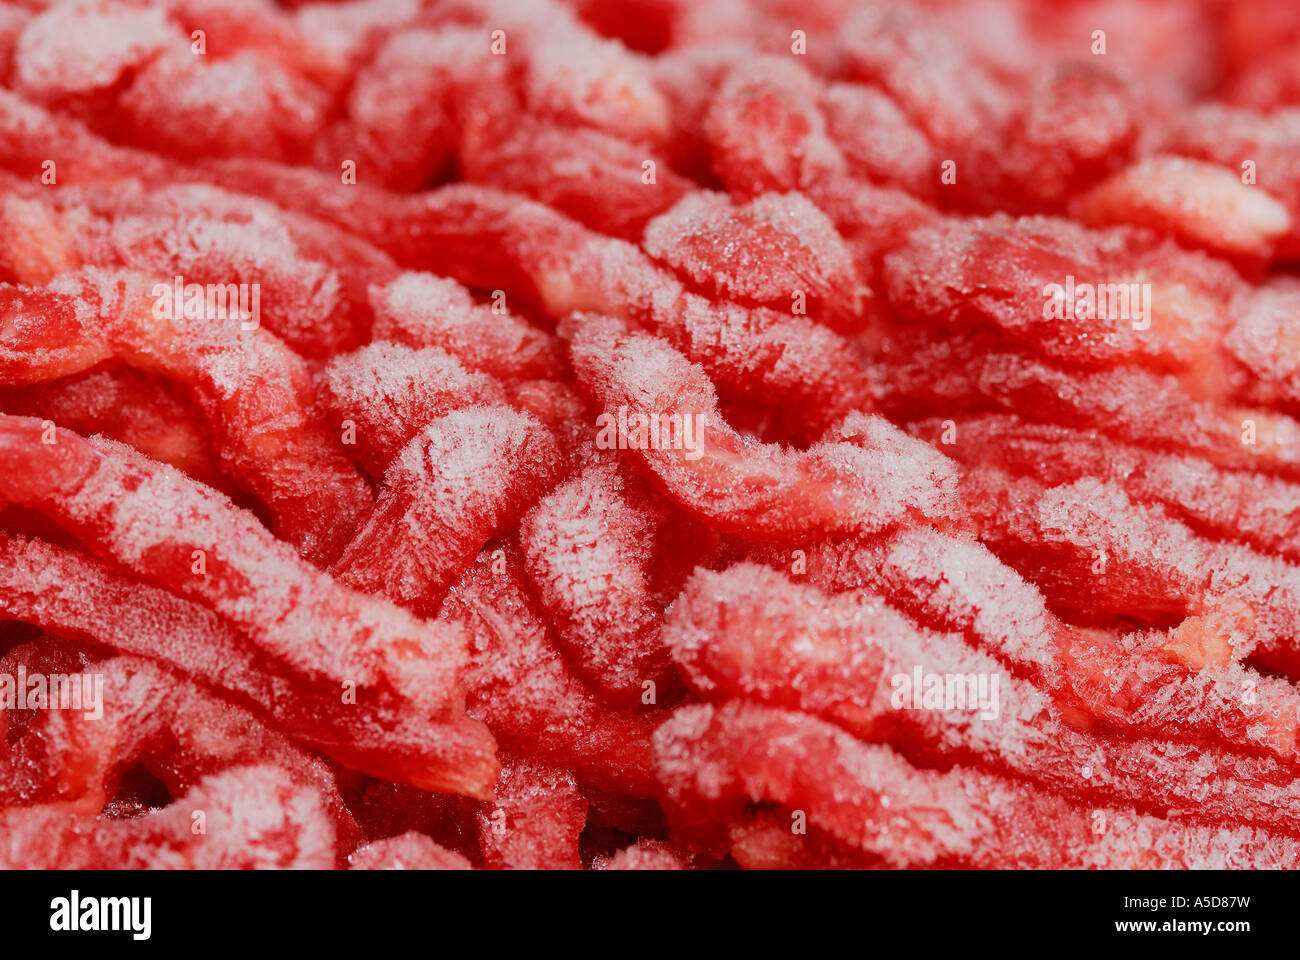 Abstract water condensation on a defrosting pack of supermarket mince meat.  Sort of reminds me of the menacing transparent eggs in the old Alien movie  Stock Photo - Alamy